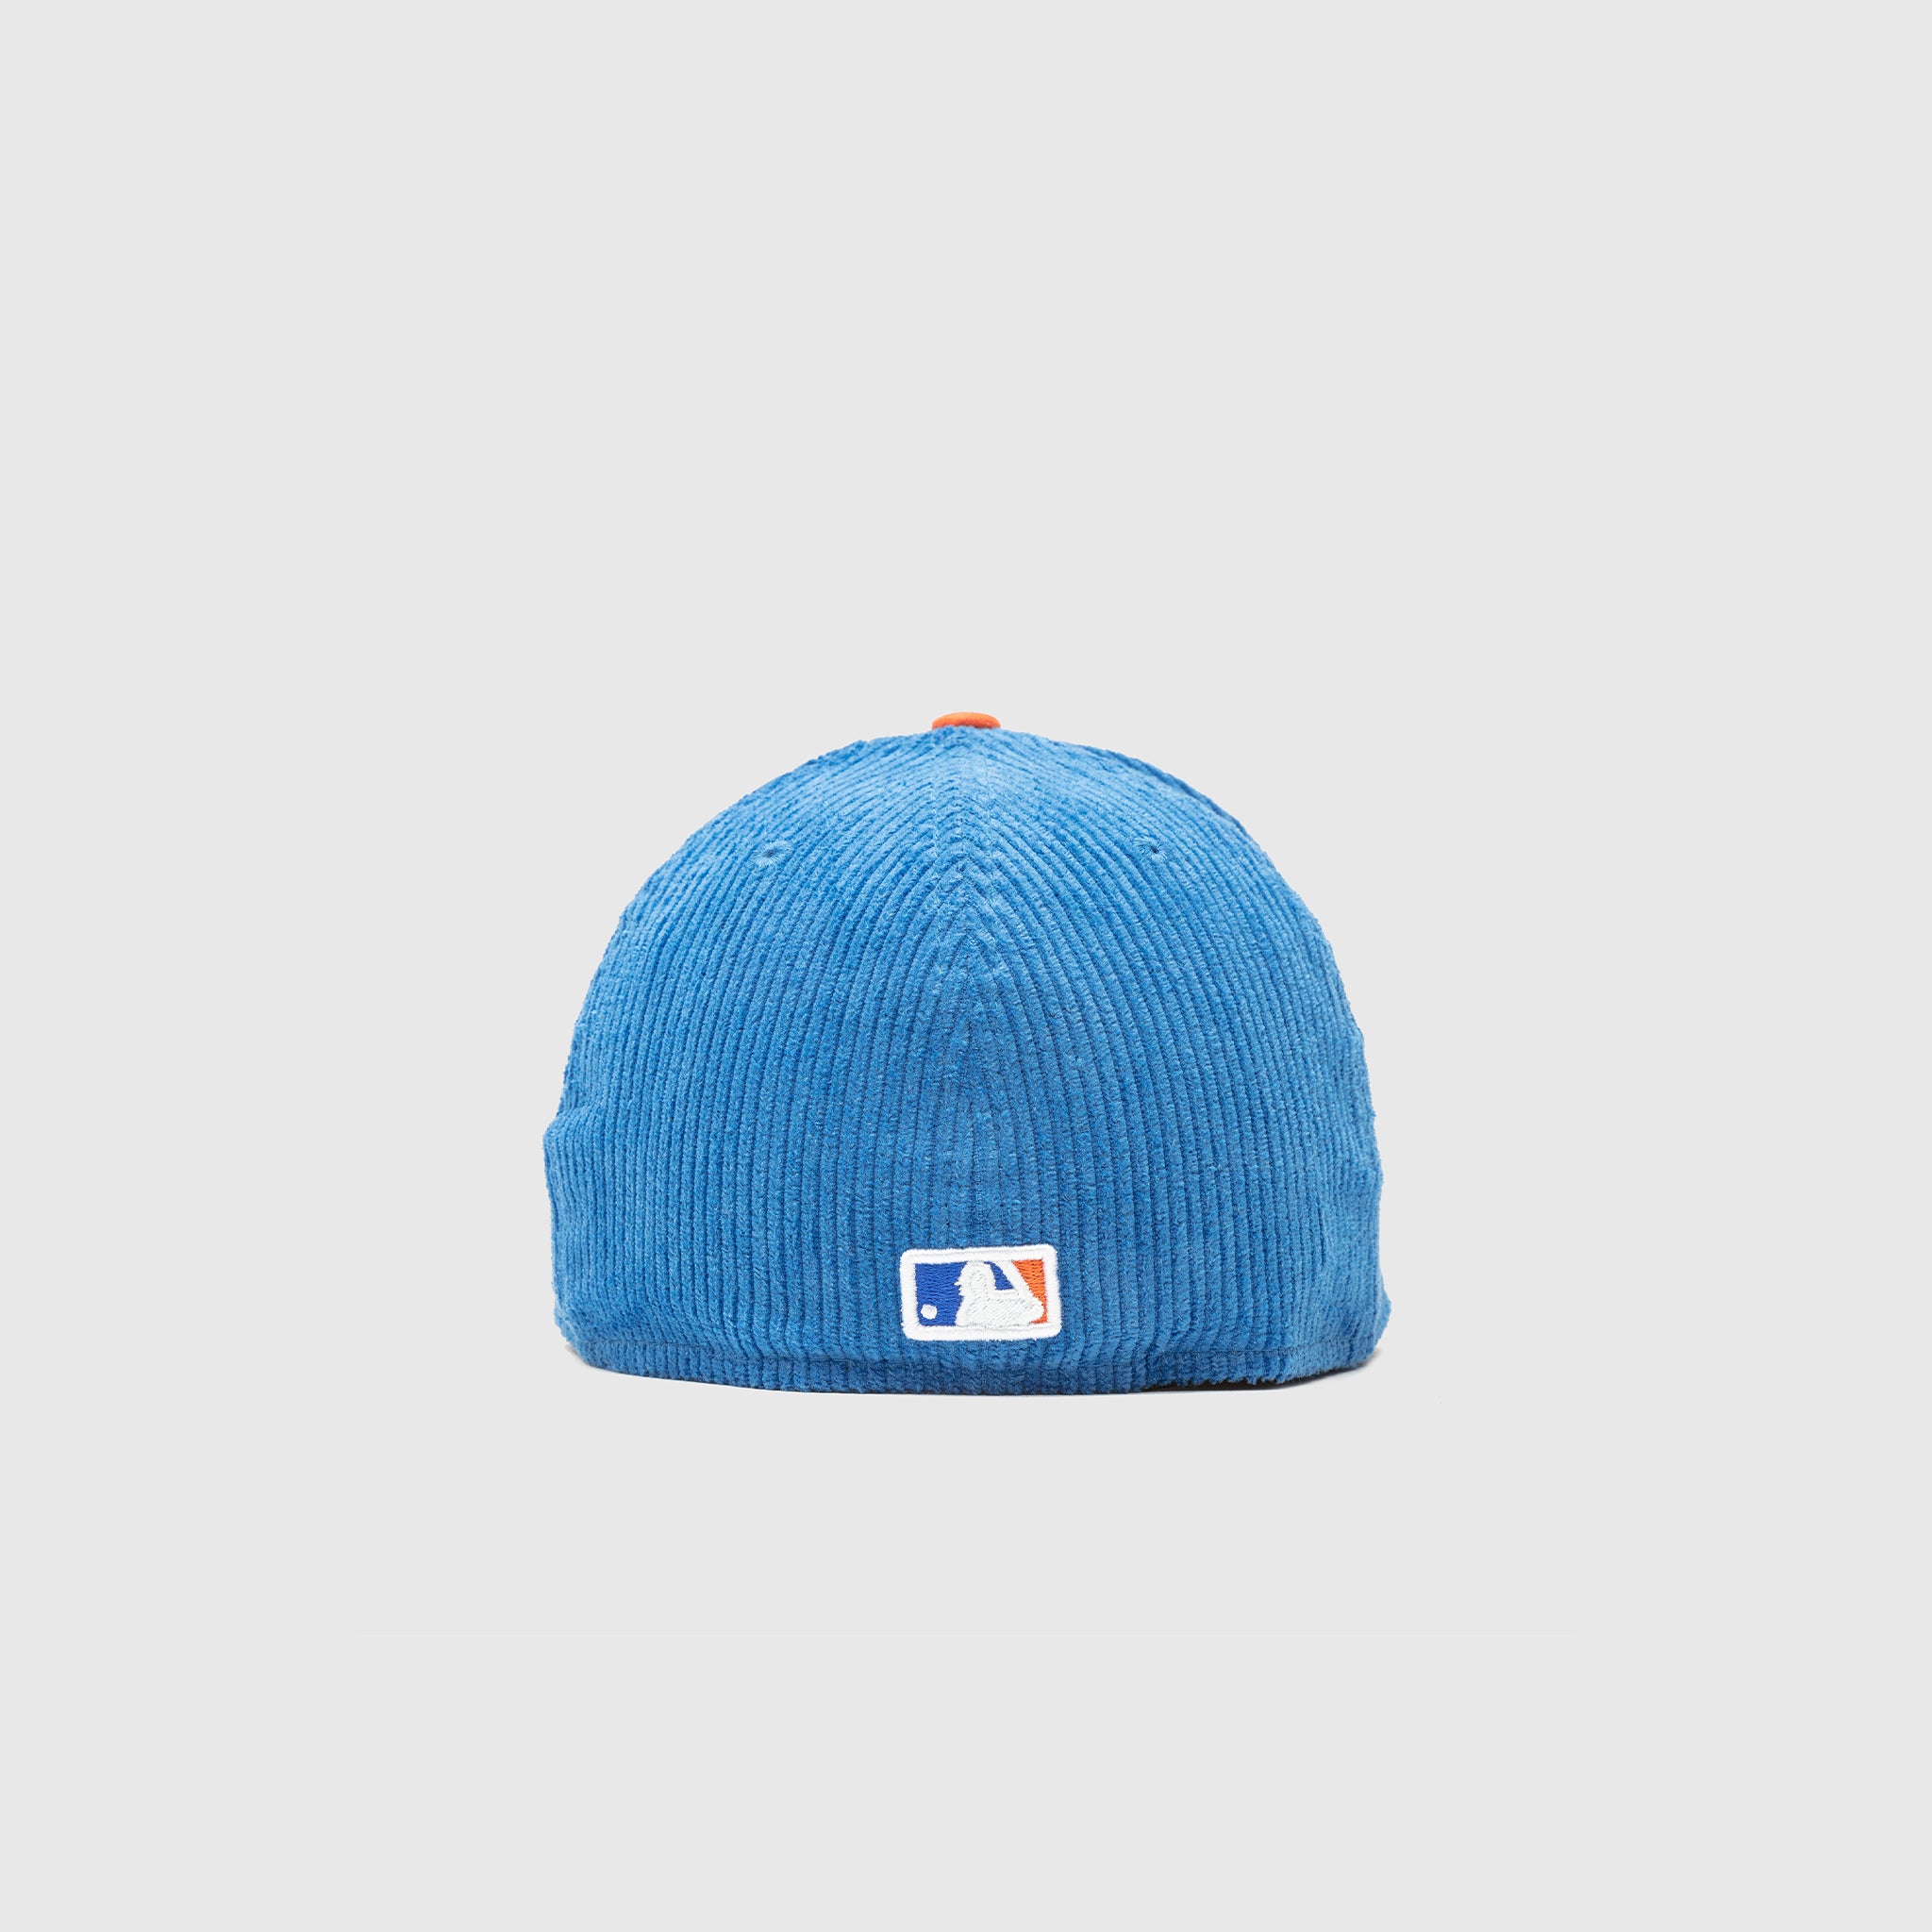 AnthonyantonellisShops X NEW ERA NEW YORK METS 59FIFTY FITTED "CORD"